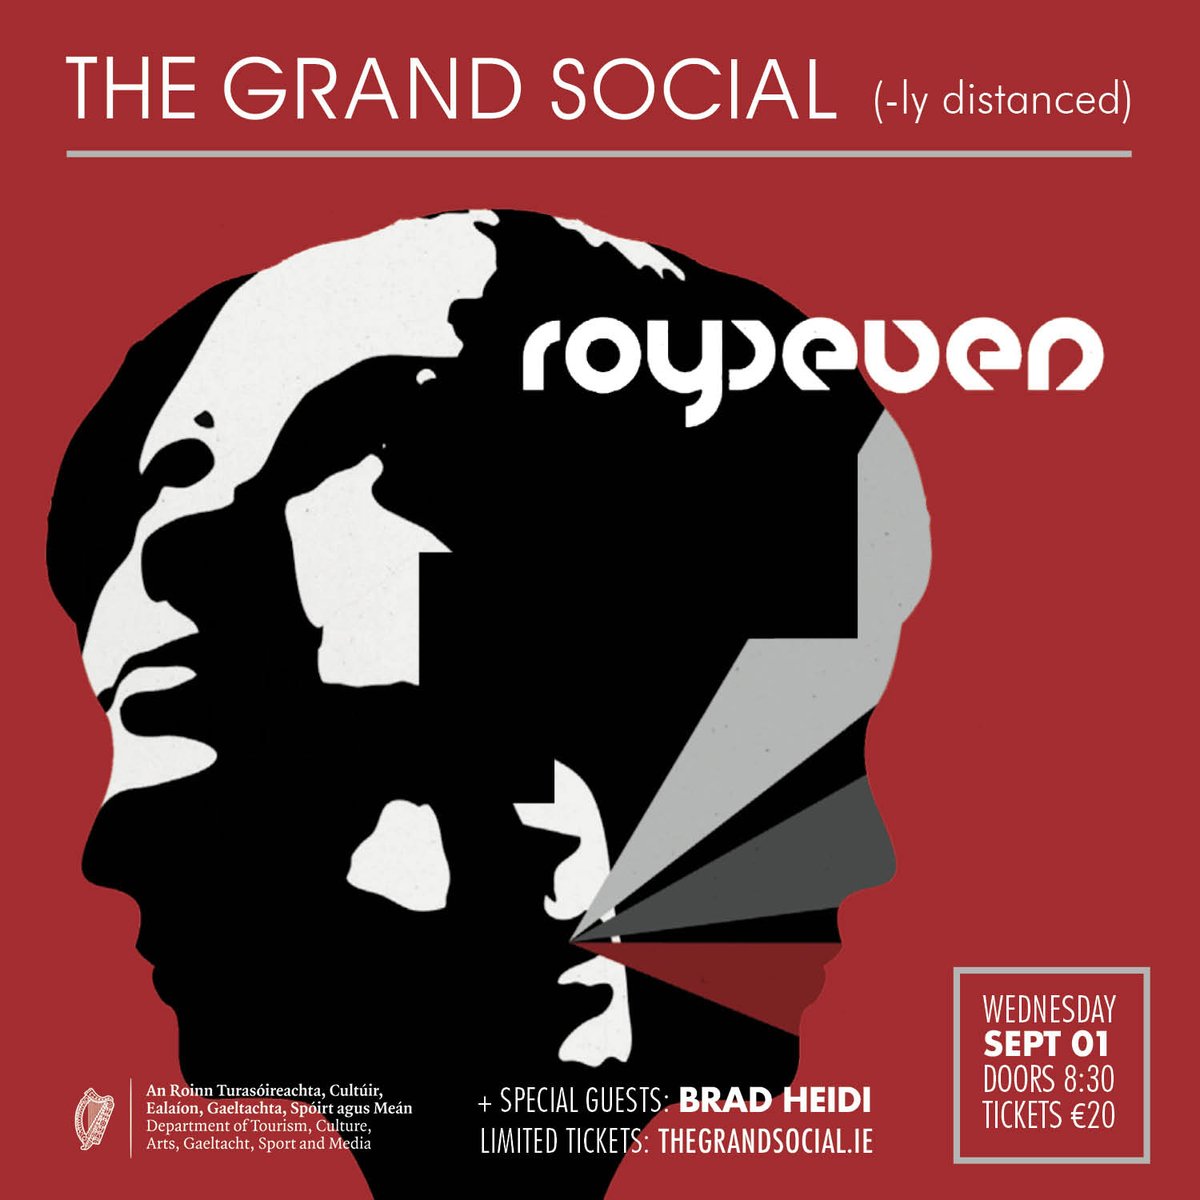 //JUST ANNOUNCED//
The Grand Social (ly distanced ) present: 
ROYSEVEN
+ Brad Heidi 
ONE NIGHT ONLY 
----------------------------
Very Limited Tickets €20 
----------------------------

secure.tickets.ie/Listing/EventI…